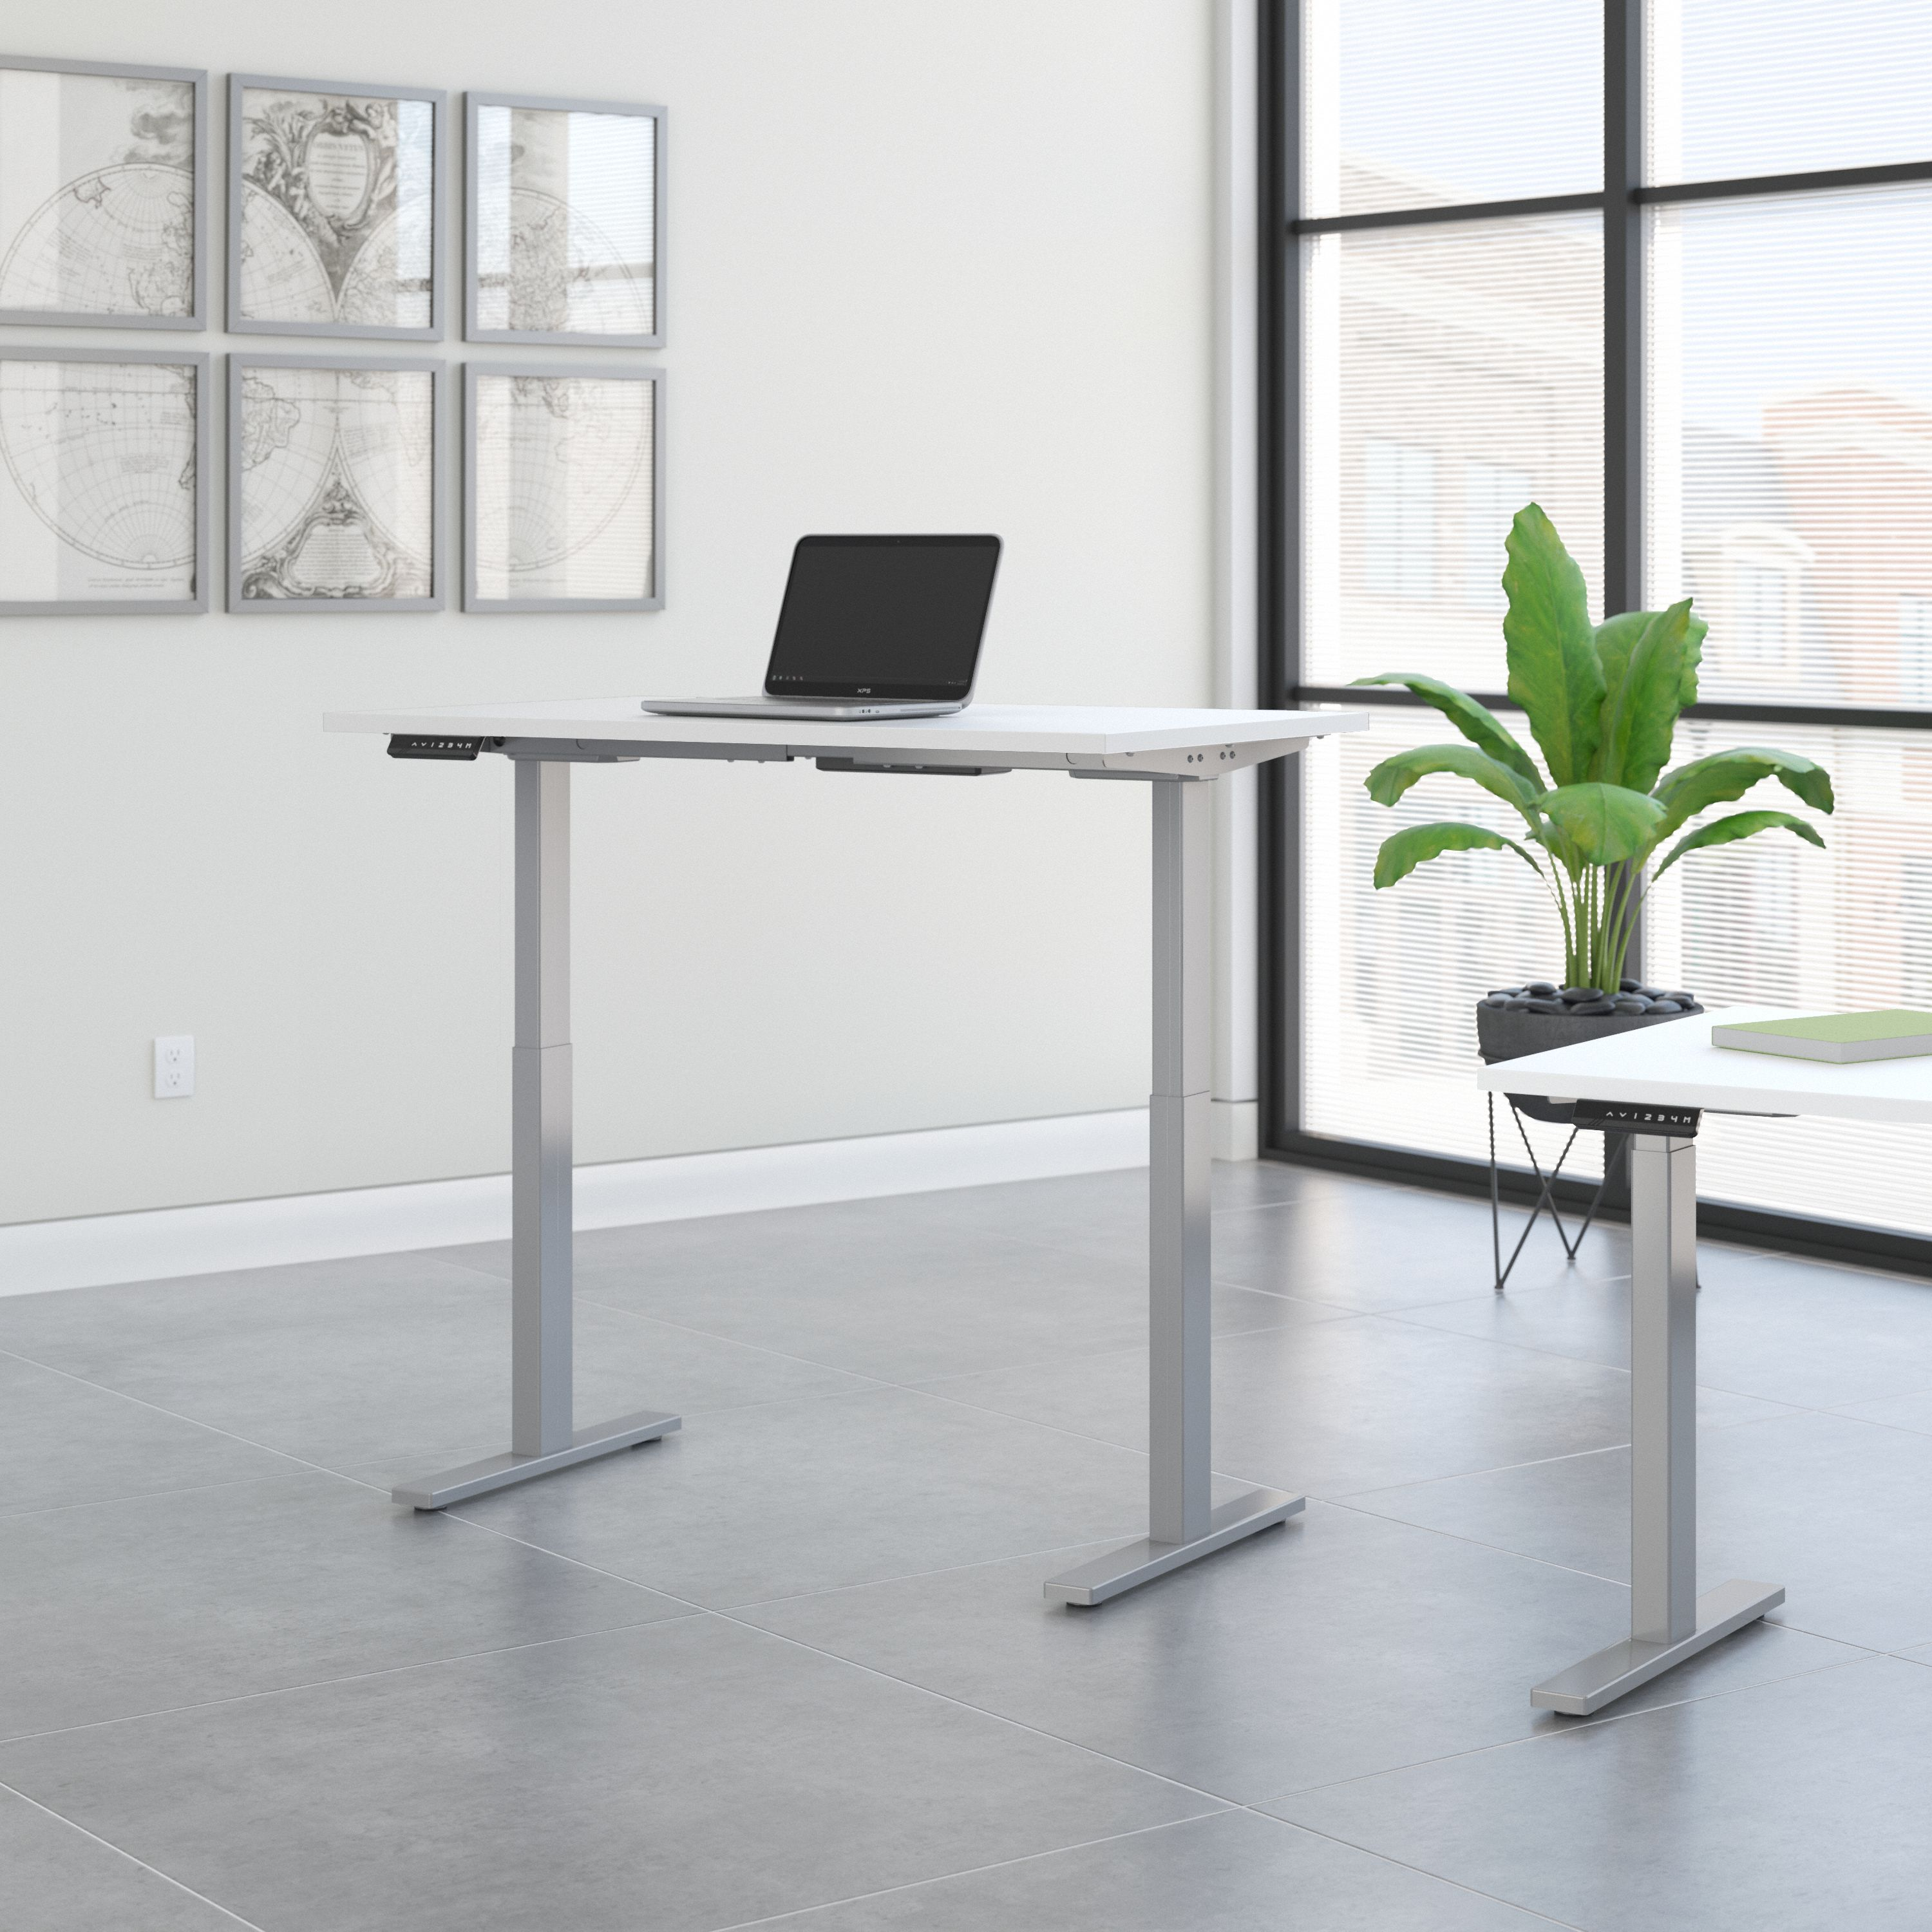 Shop Move 60 Series by Bush Business Furniture 48W x 24D Electric Height Adjustable Standing Desk 01 M6S4824WHSK #color_white/cool gray metallic